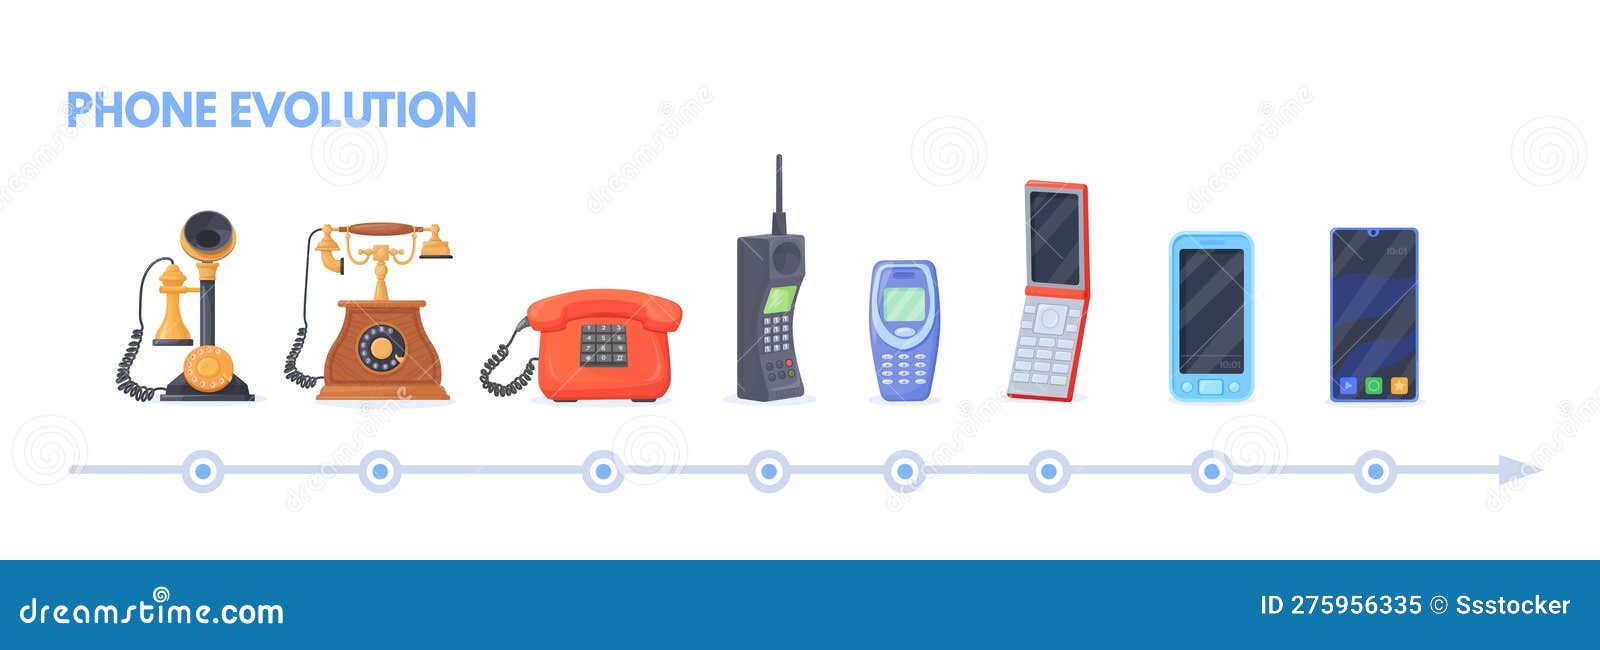 Phone Evolution. History First Telephone Invention To Modern Smartphone